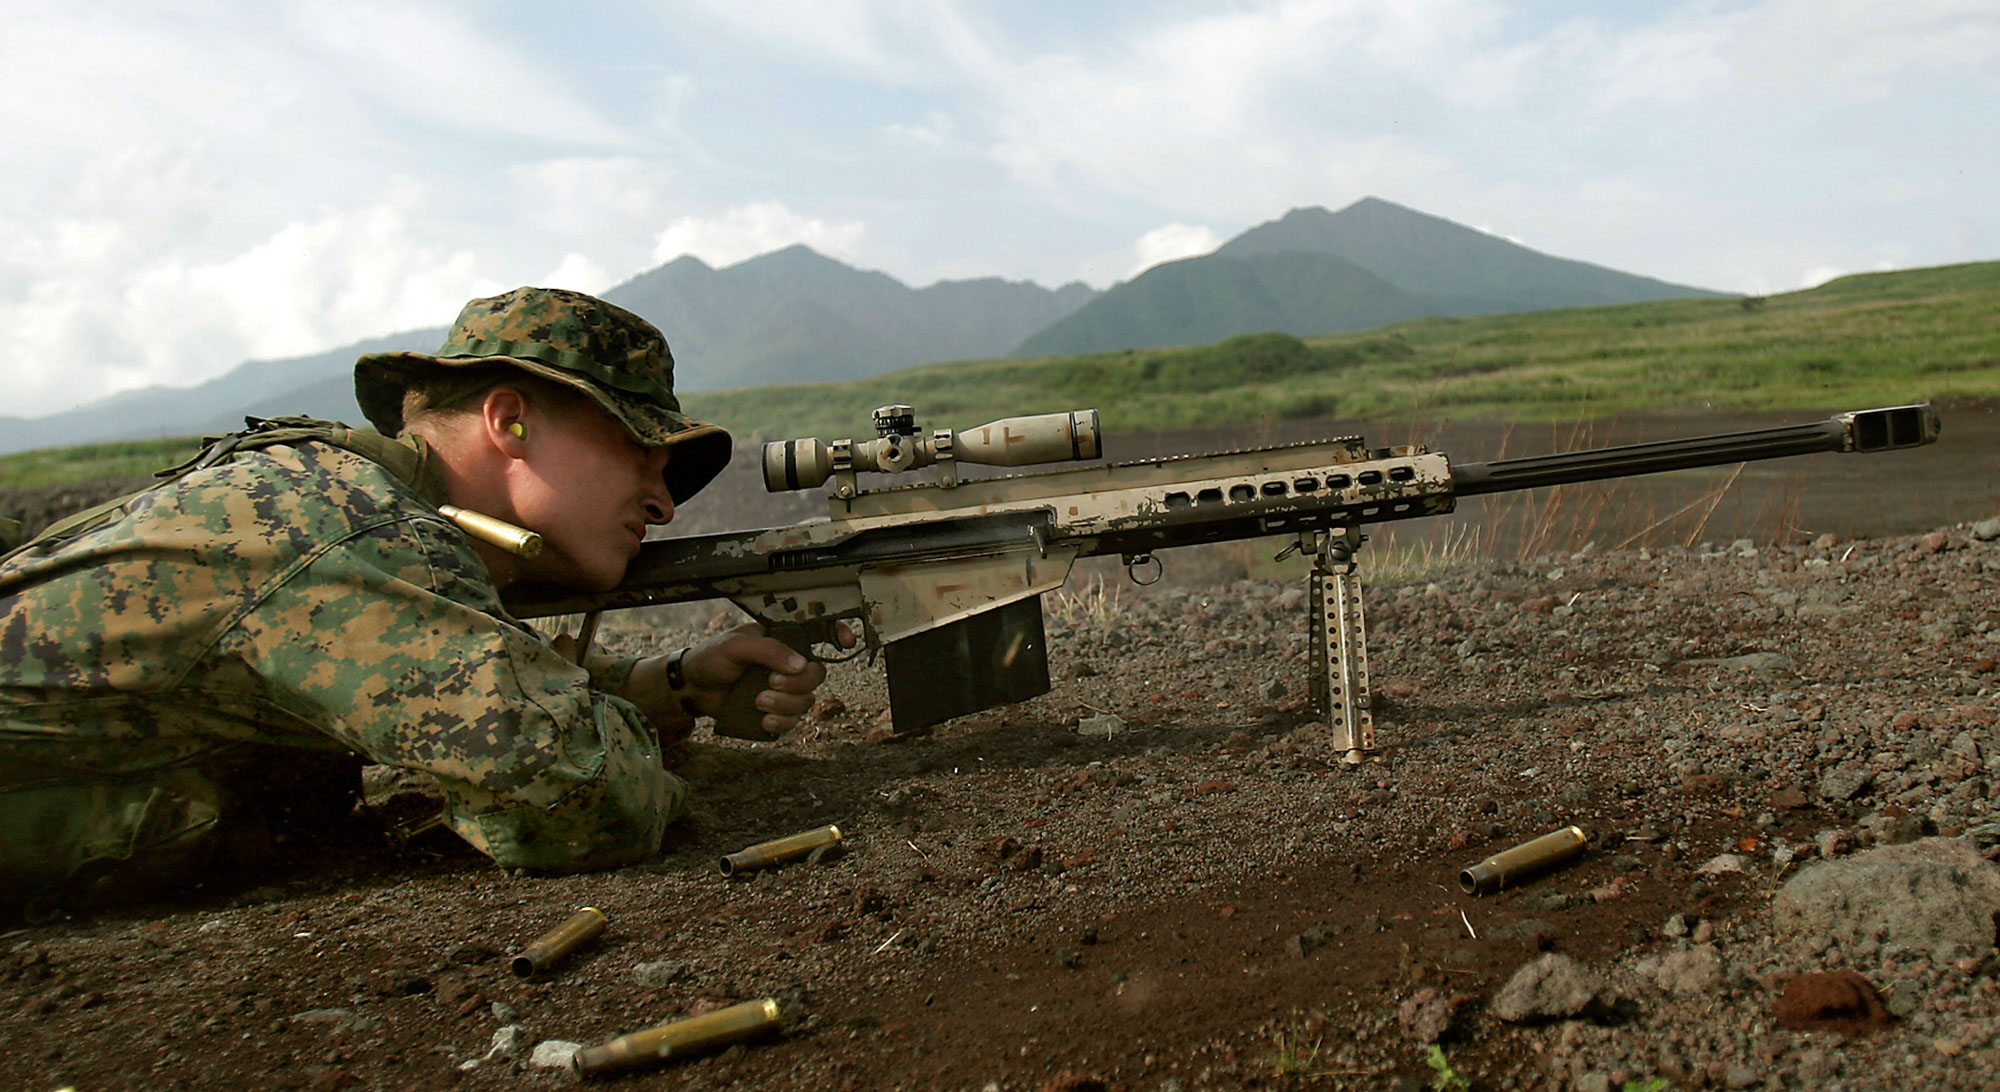 Barrett M82 A3 during a USMC training exercise